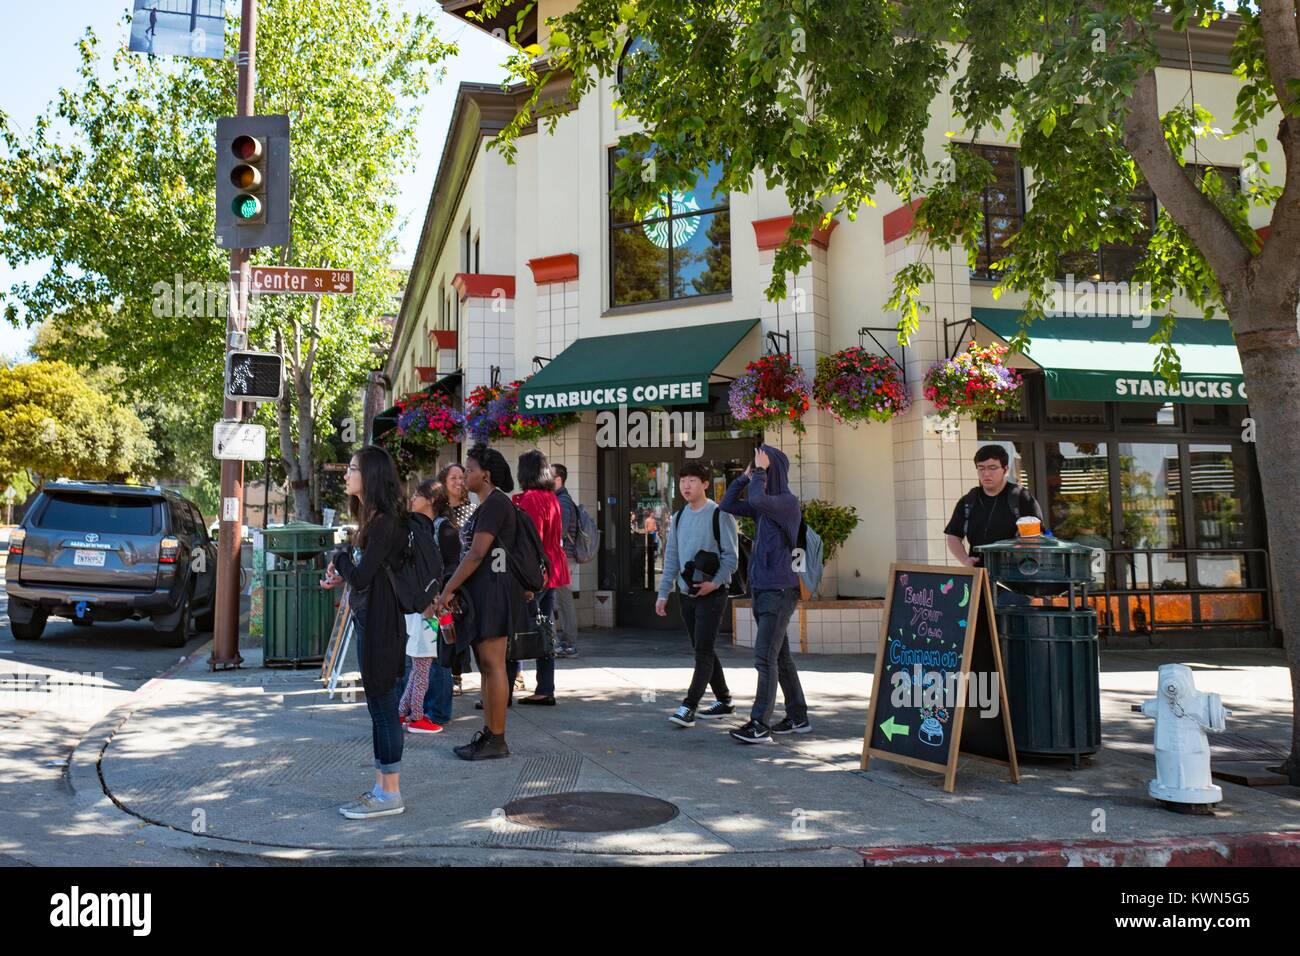 Tourists and students walk past a Starbucks Coffee cafe at the corner of Center Street and Oxford Street in a trendy section of downtown Berkeley, California, outside the campus of UC Berkeley, July 14, 2017. Stock Photo